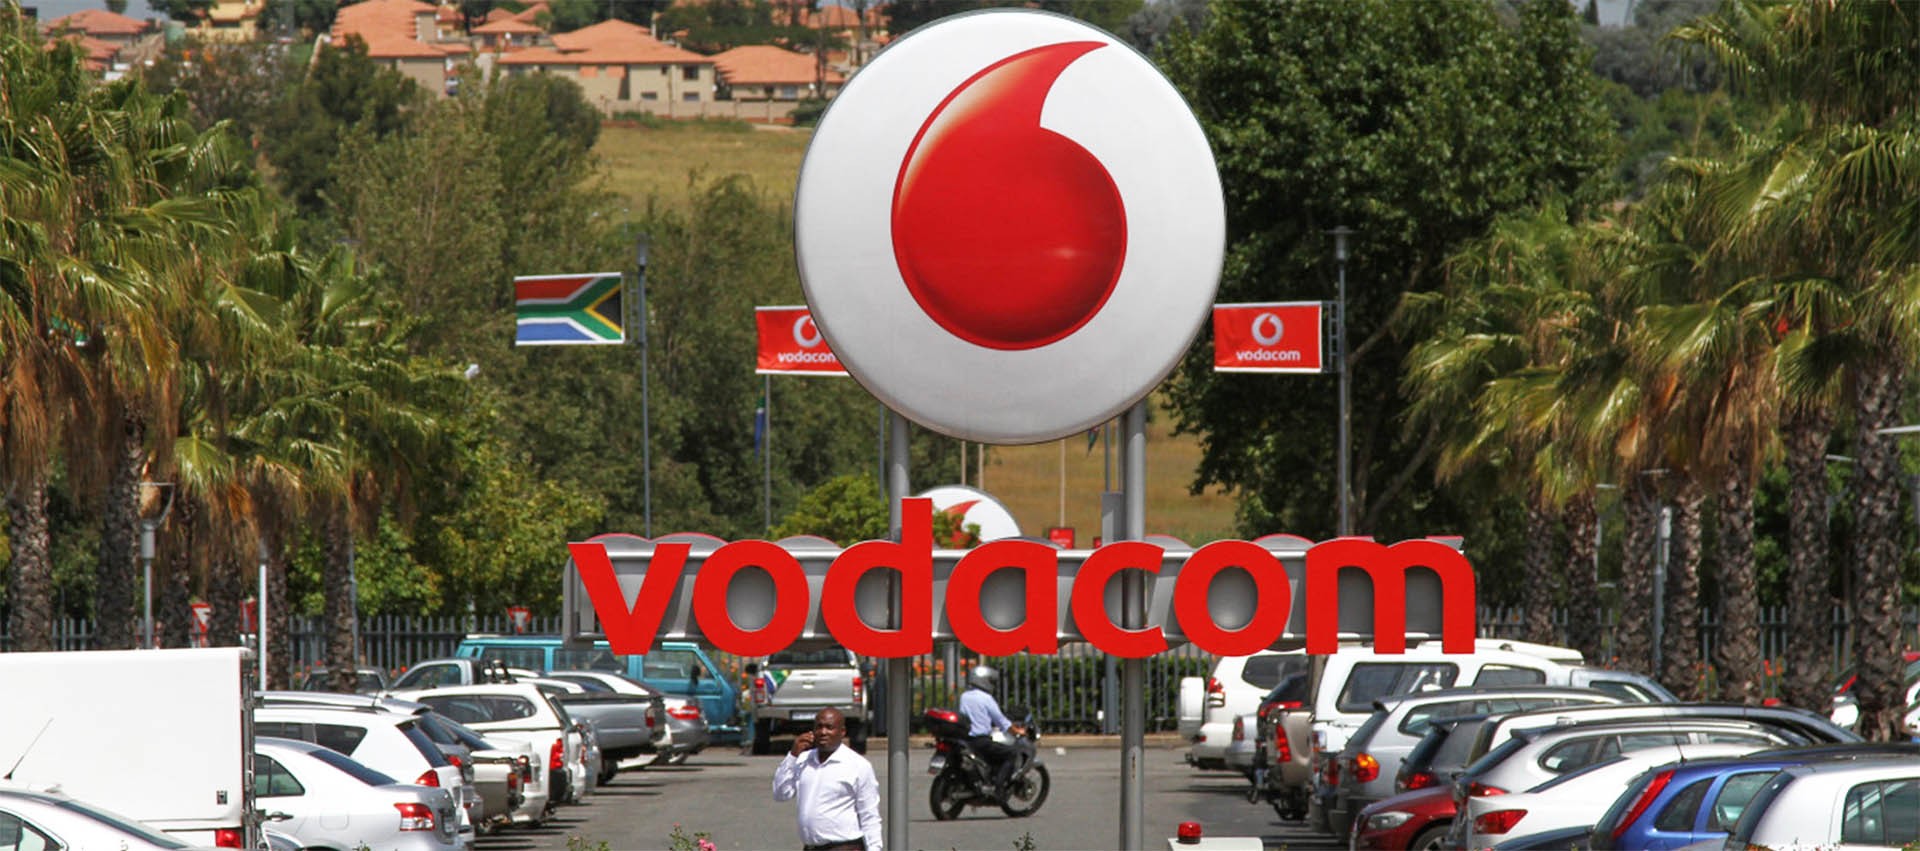 Nokia Enables Ultra-fast 5G services for Vodacom South Africa, SiliconNigeria